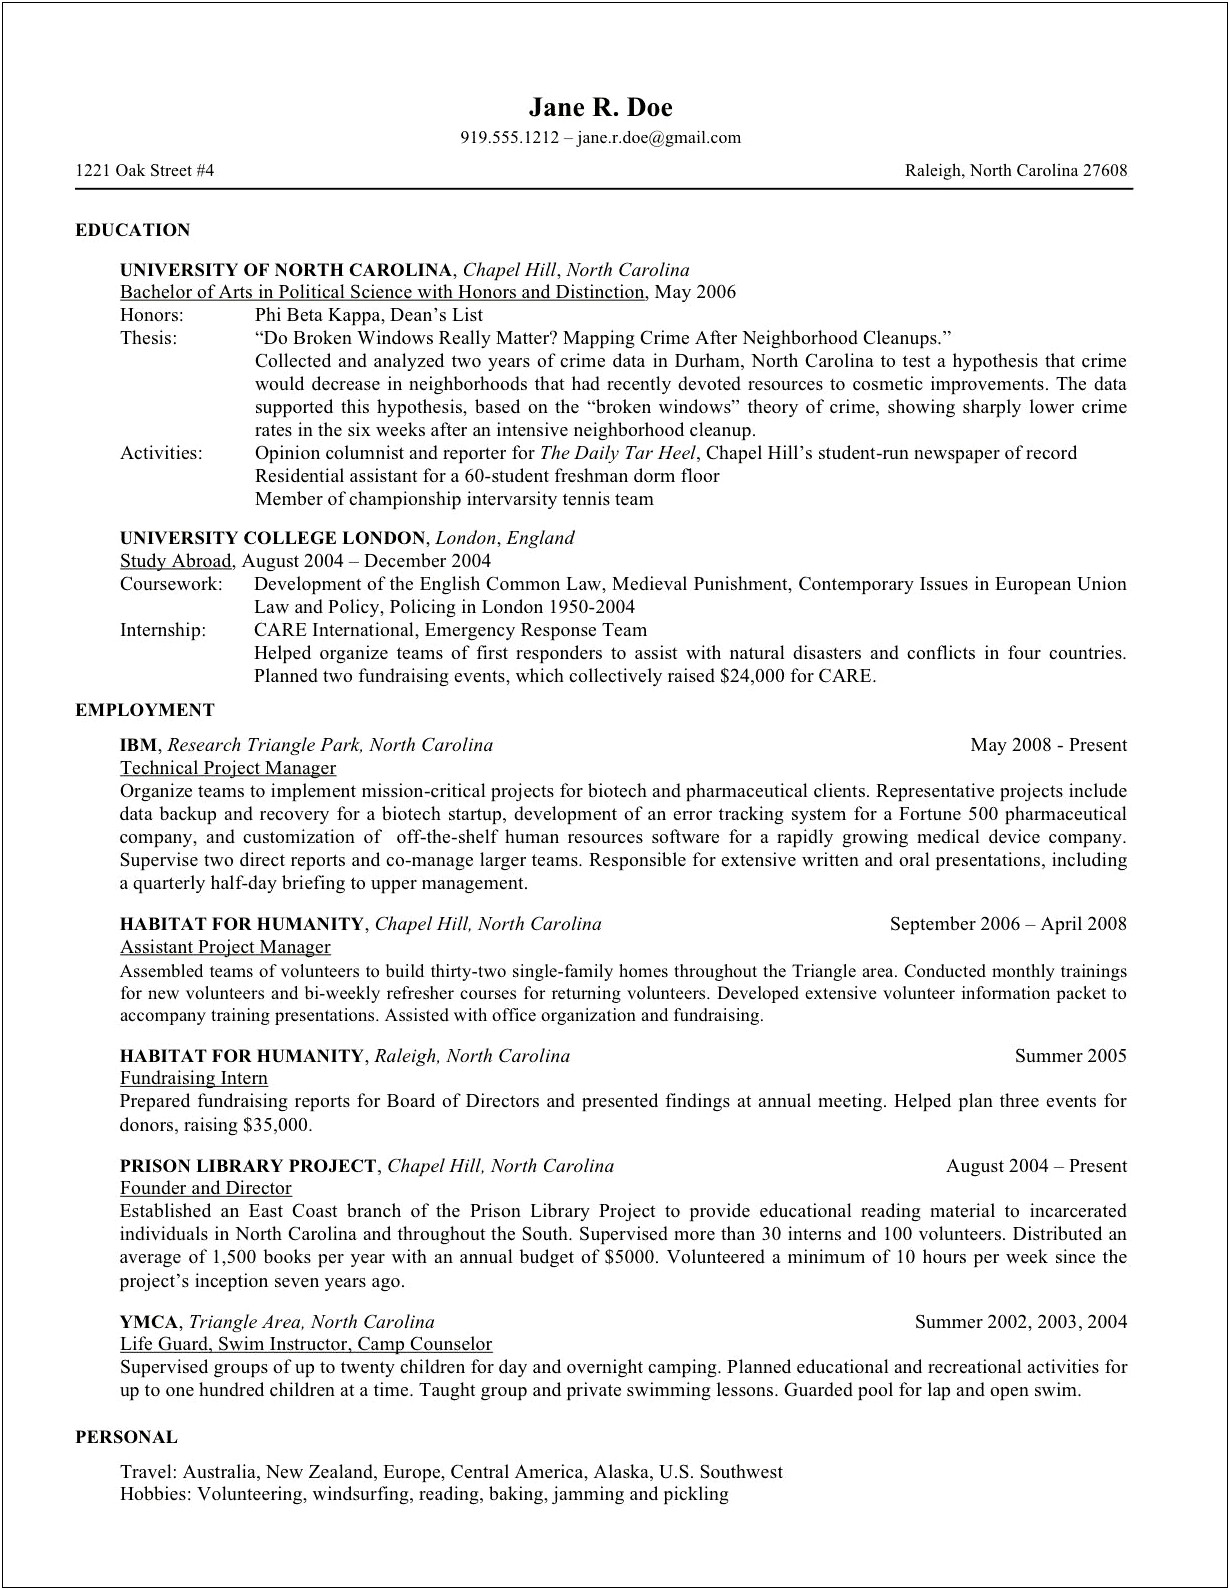 Law School Research Assistant On Resume